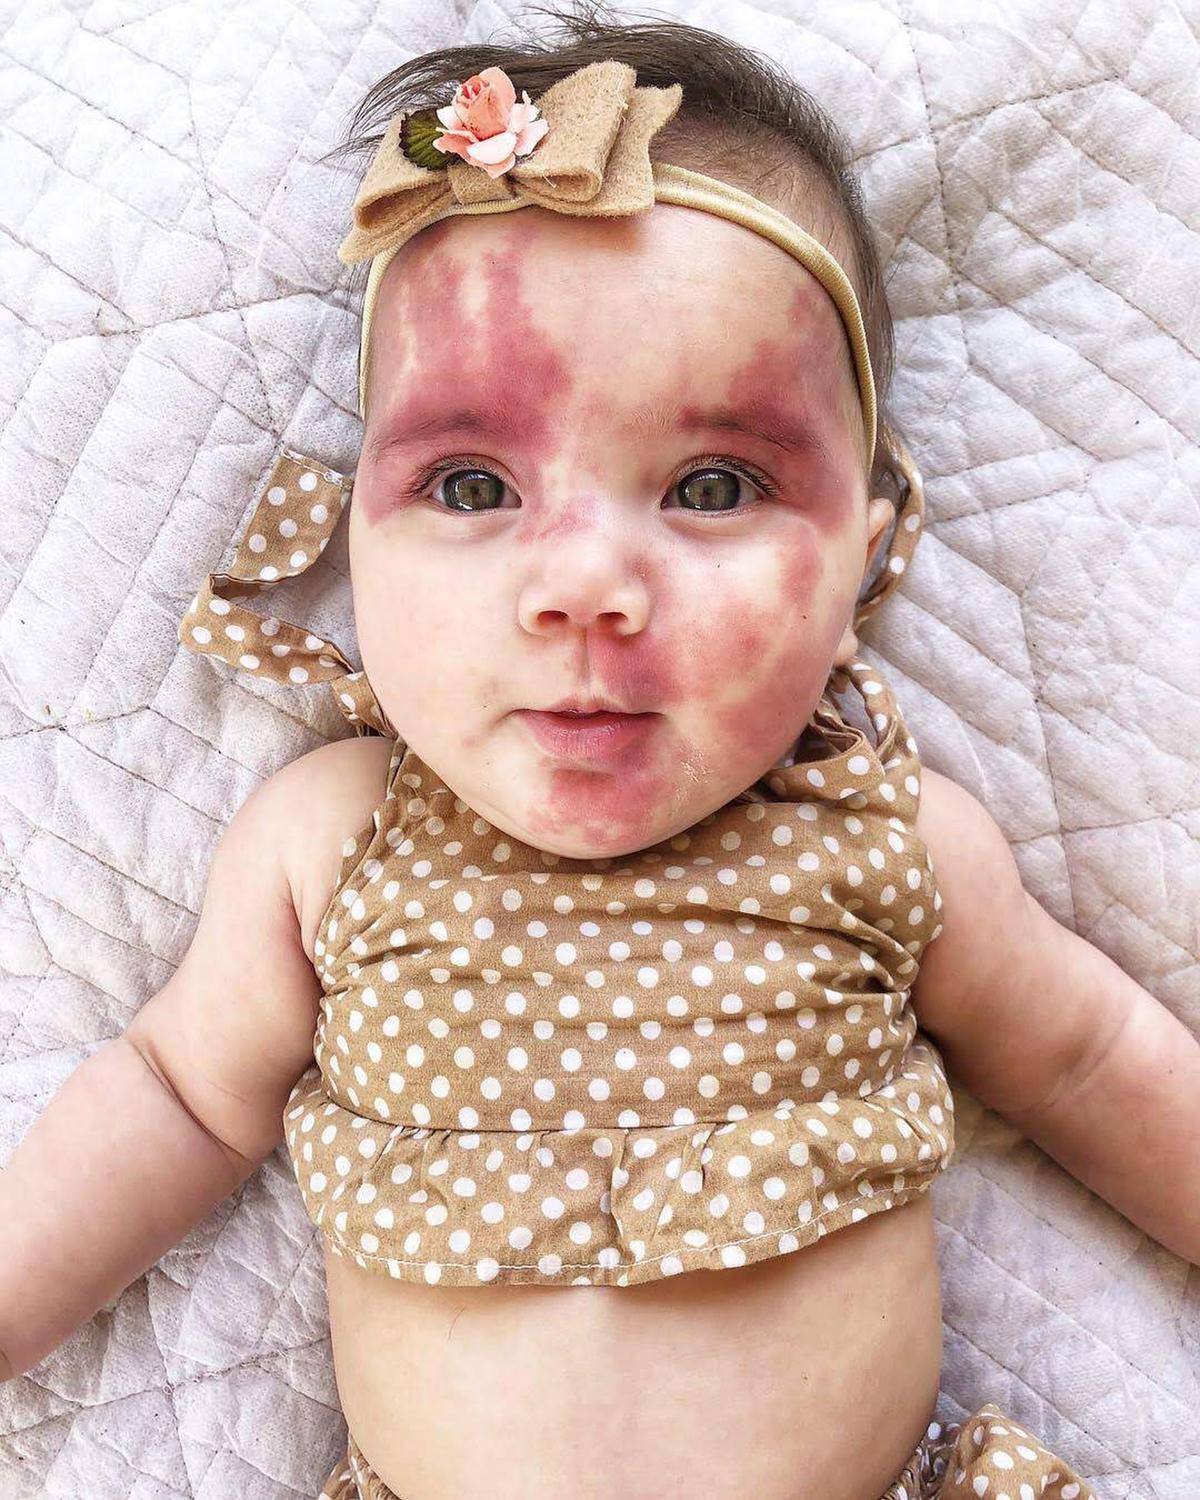 Baby Angelica's port-wine stain birthmark, which her mother calls an "angel kiss." (Caters News)